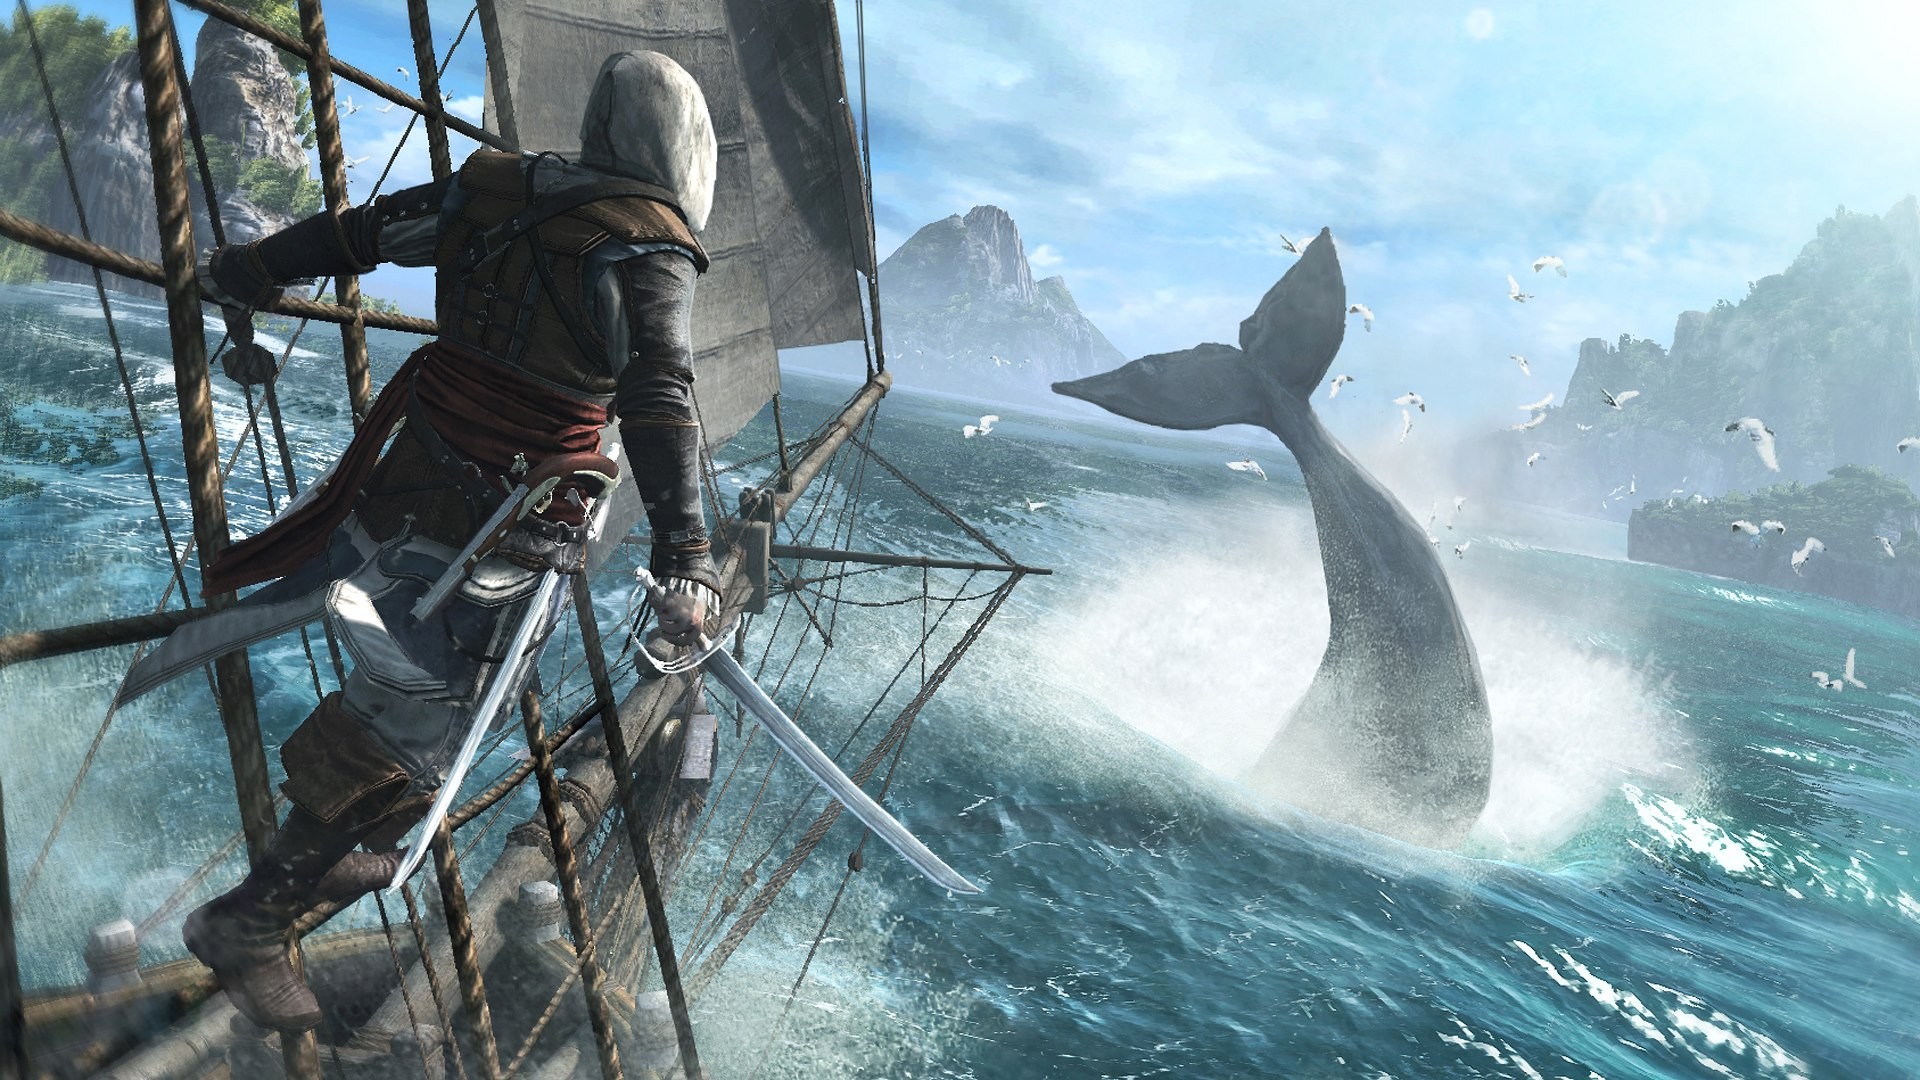 Free HD assassin's creed iv: black flag, video game, assassin's creed